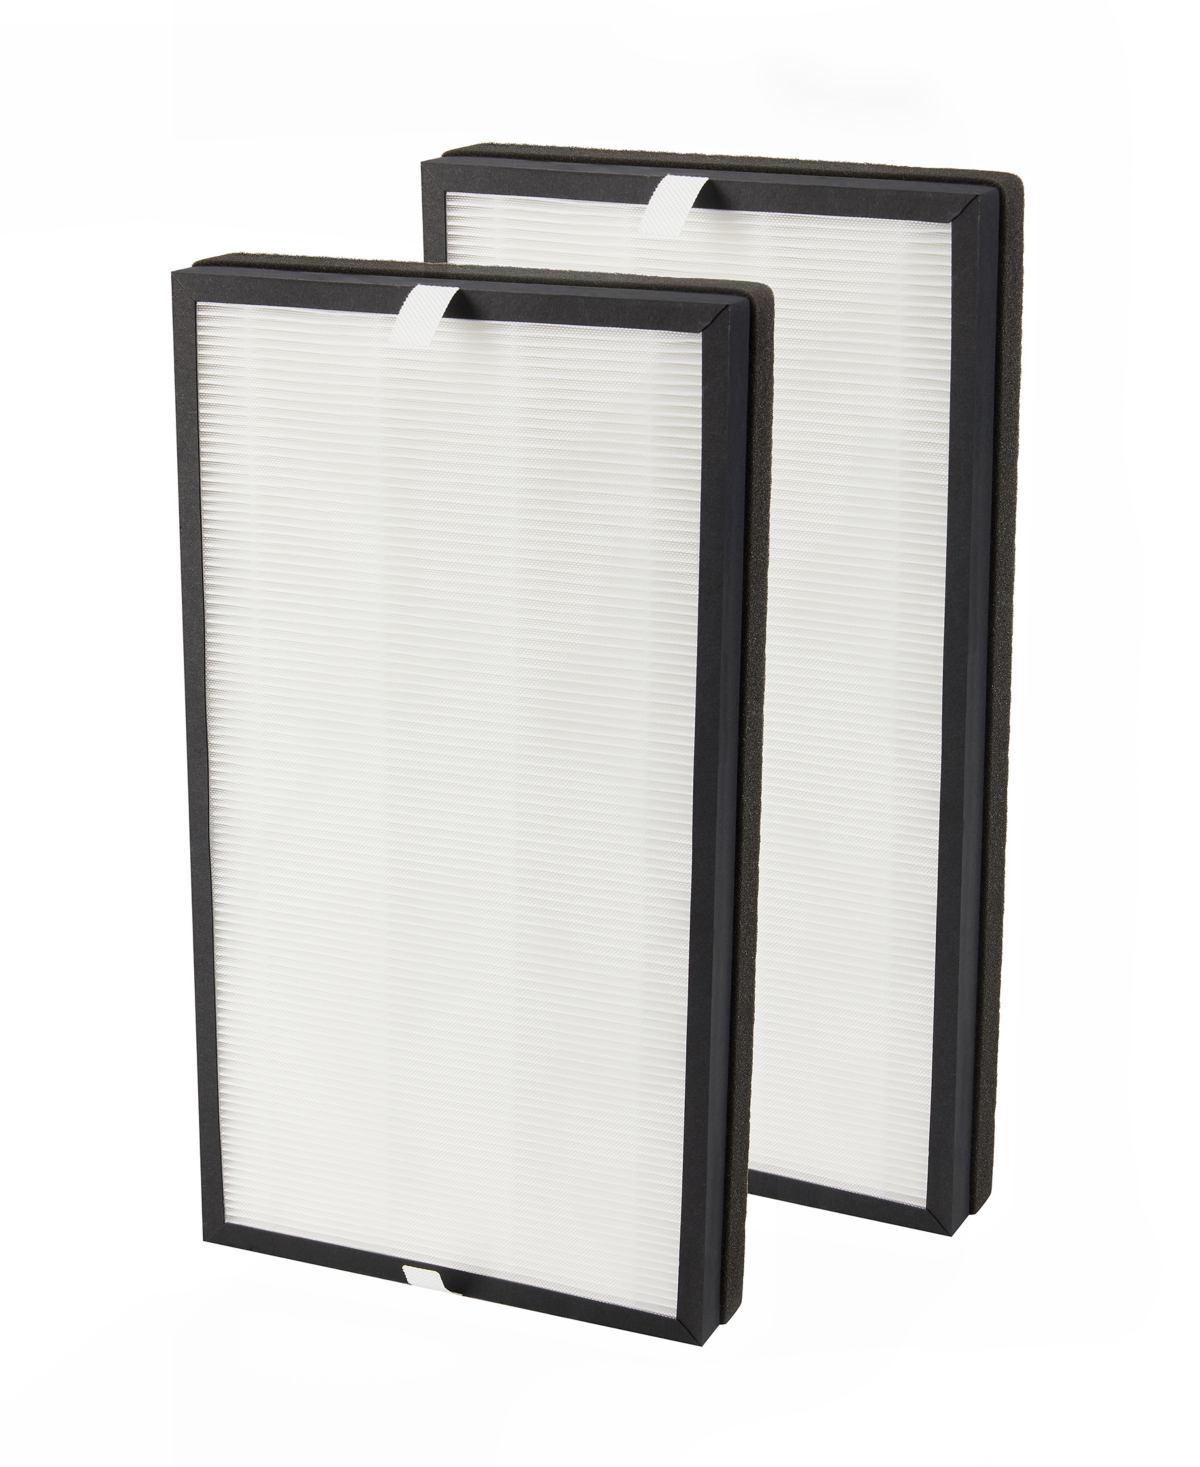 Homedics True Hepa Replacement Filter For , Ap-c500 In White